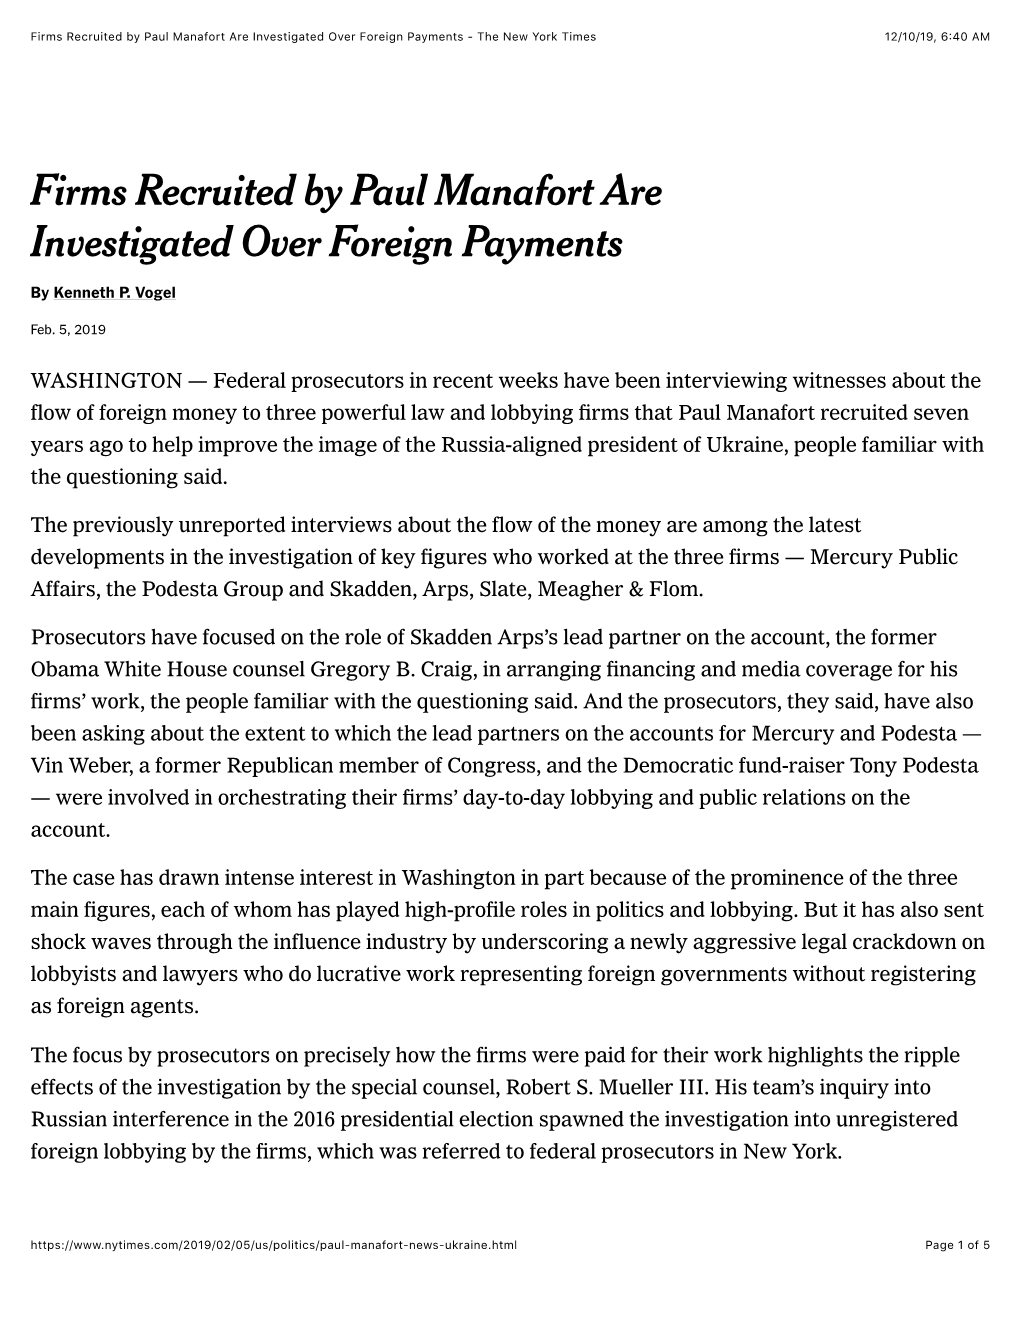 Firms Recruited by Paul Manafort Are Investigated Over Foreign Payments - the New York Times 12/10/19, 6:40 AM